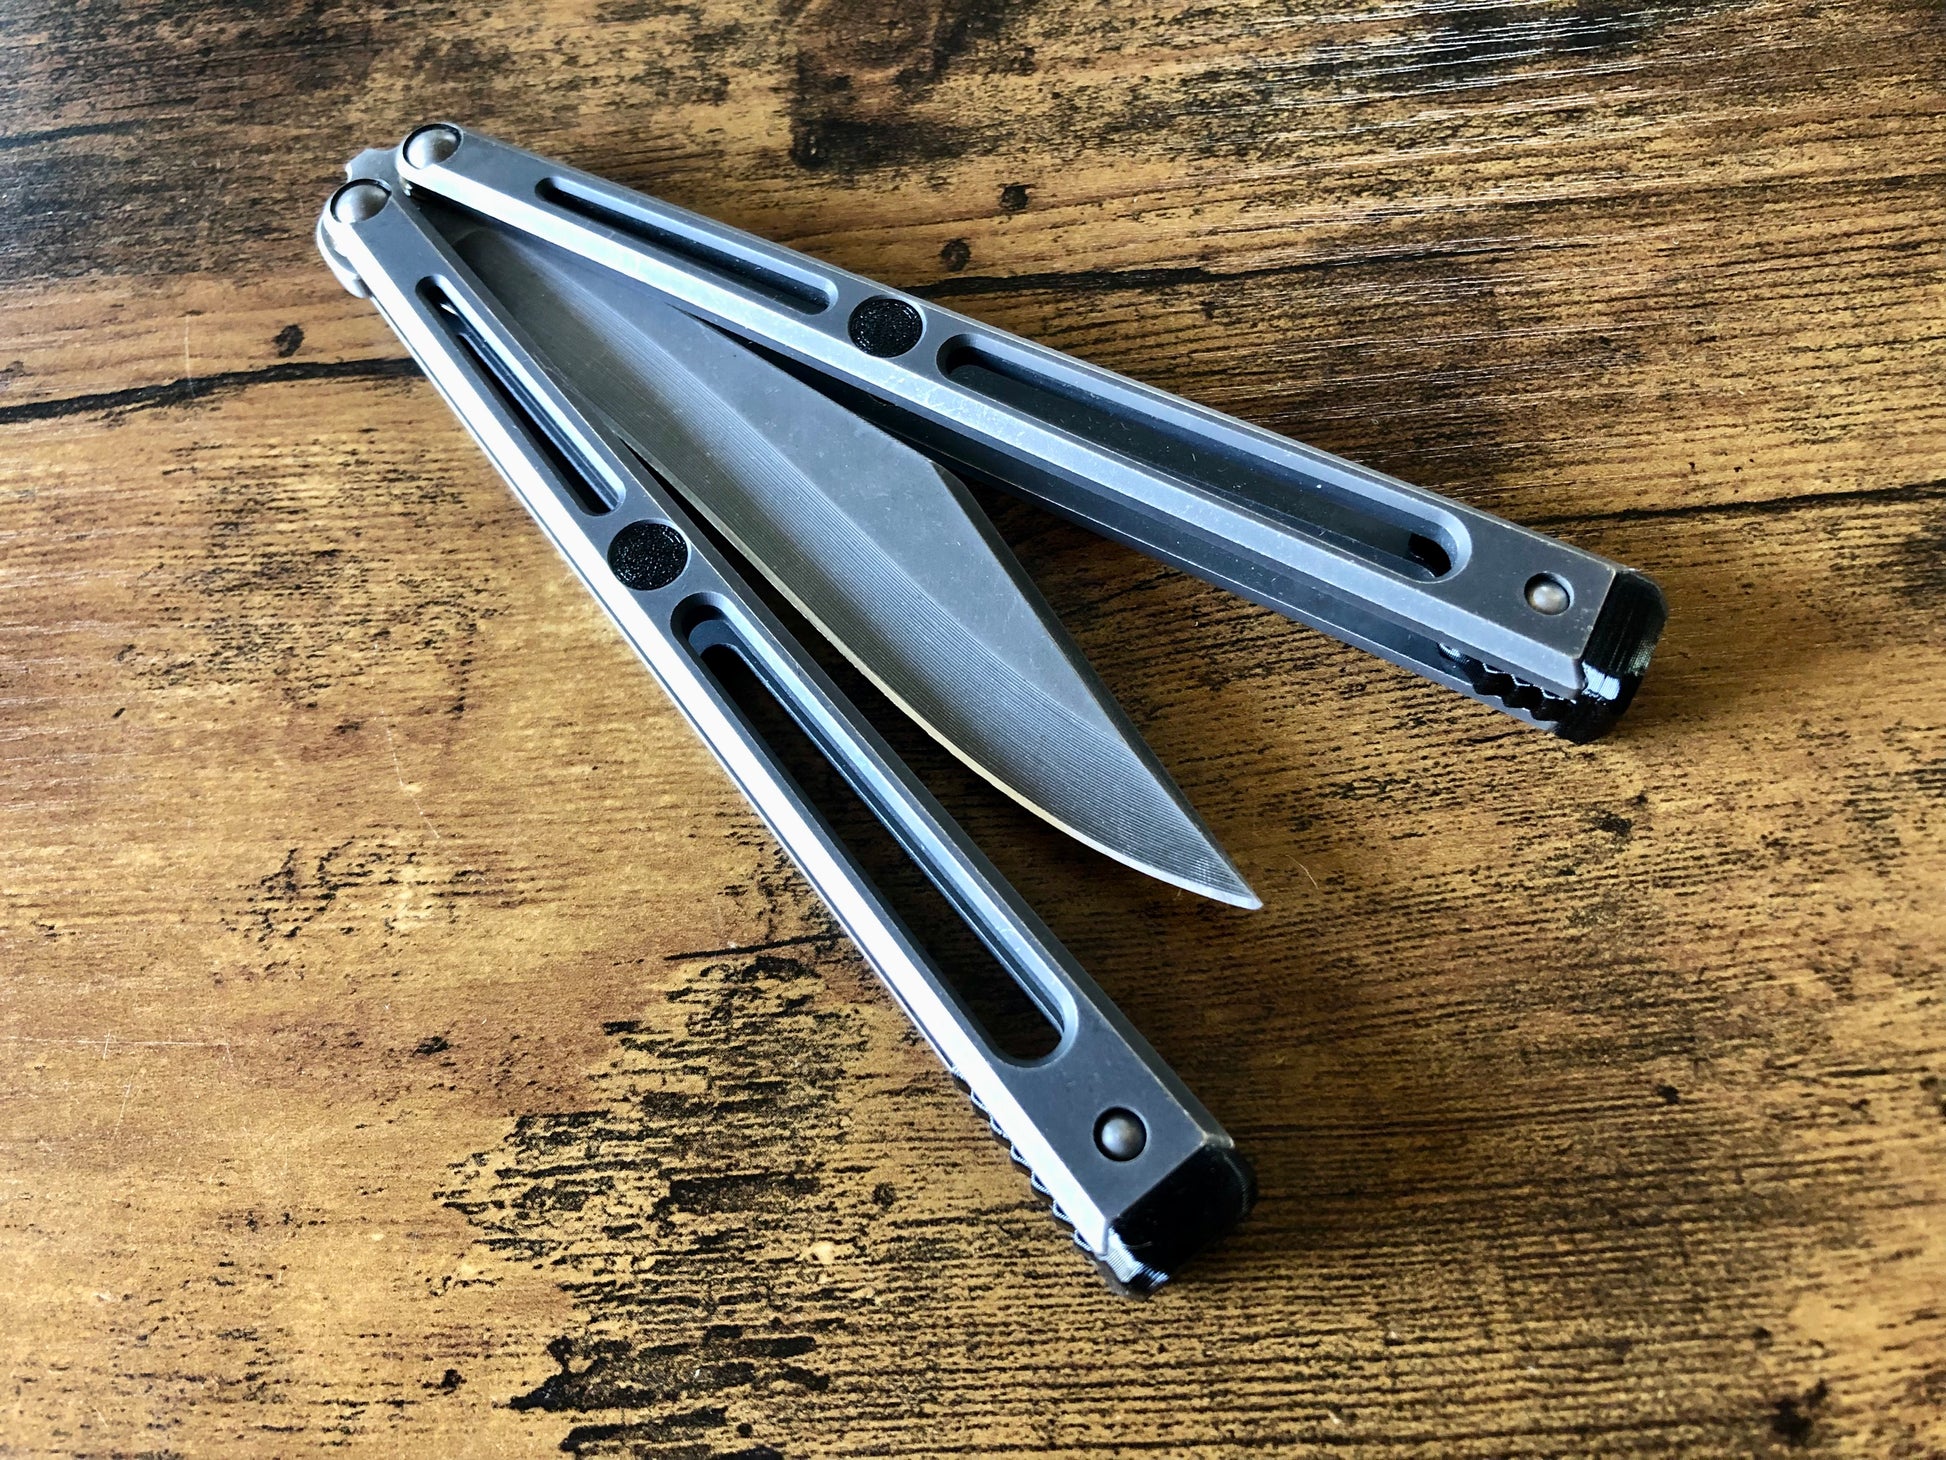 Extend and protect your handles with these Zippy spacers, custom-made for the Goose balisong (designed by Arthur Goins and machined by JK Design). The spacers are made from a shatter-proof polyurethane and protect your handles from drops while adding length. The spacers also feature positive sawtooth jimping and adjustable balance.